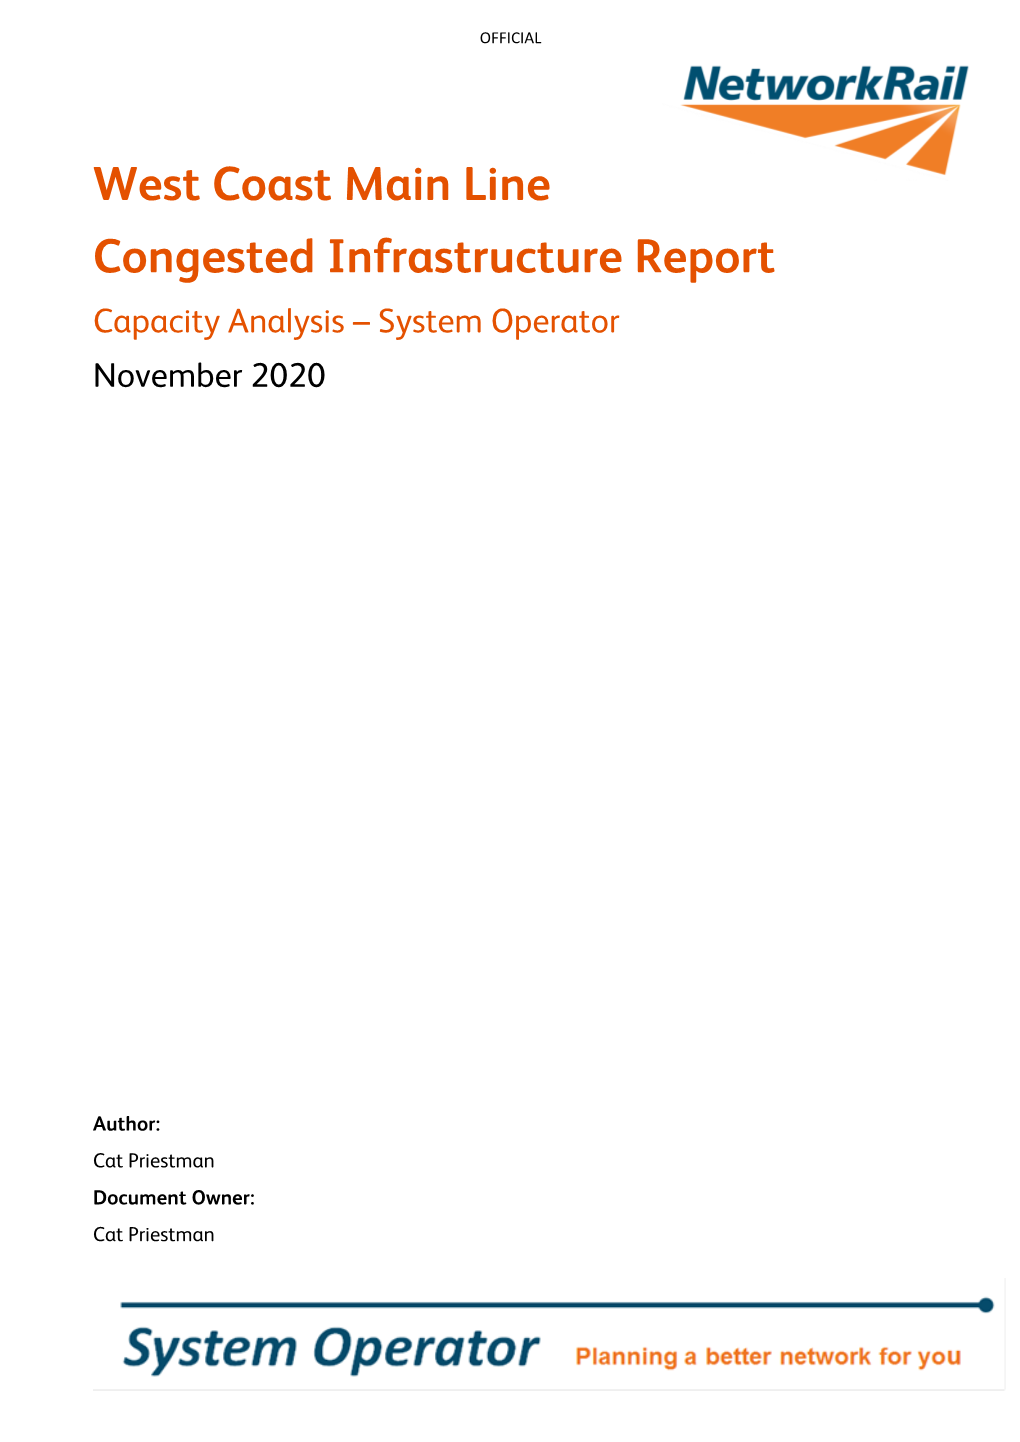 West Coast Main Line Congested Infrastructure Report Capacity Analysis – System Operator